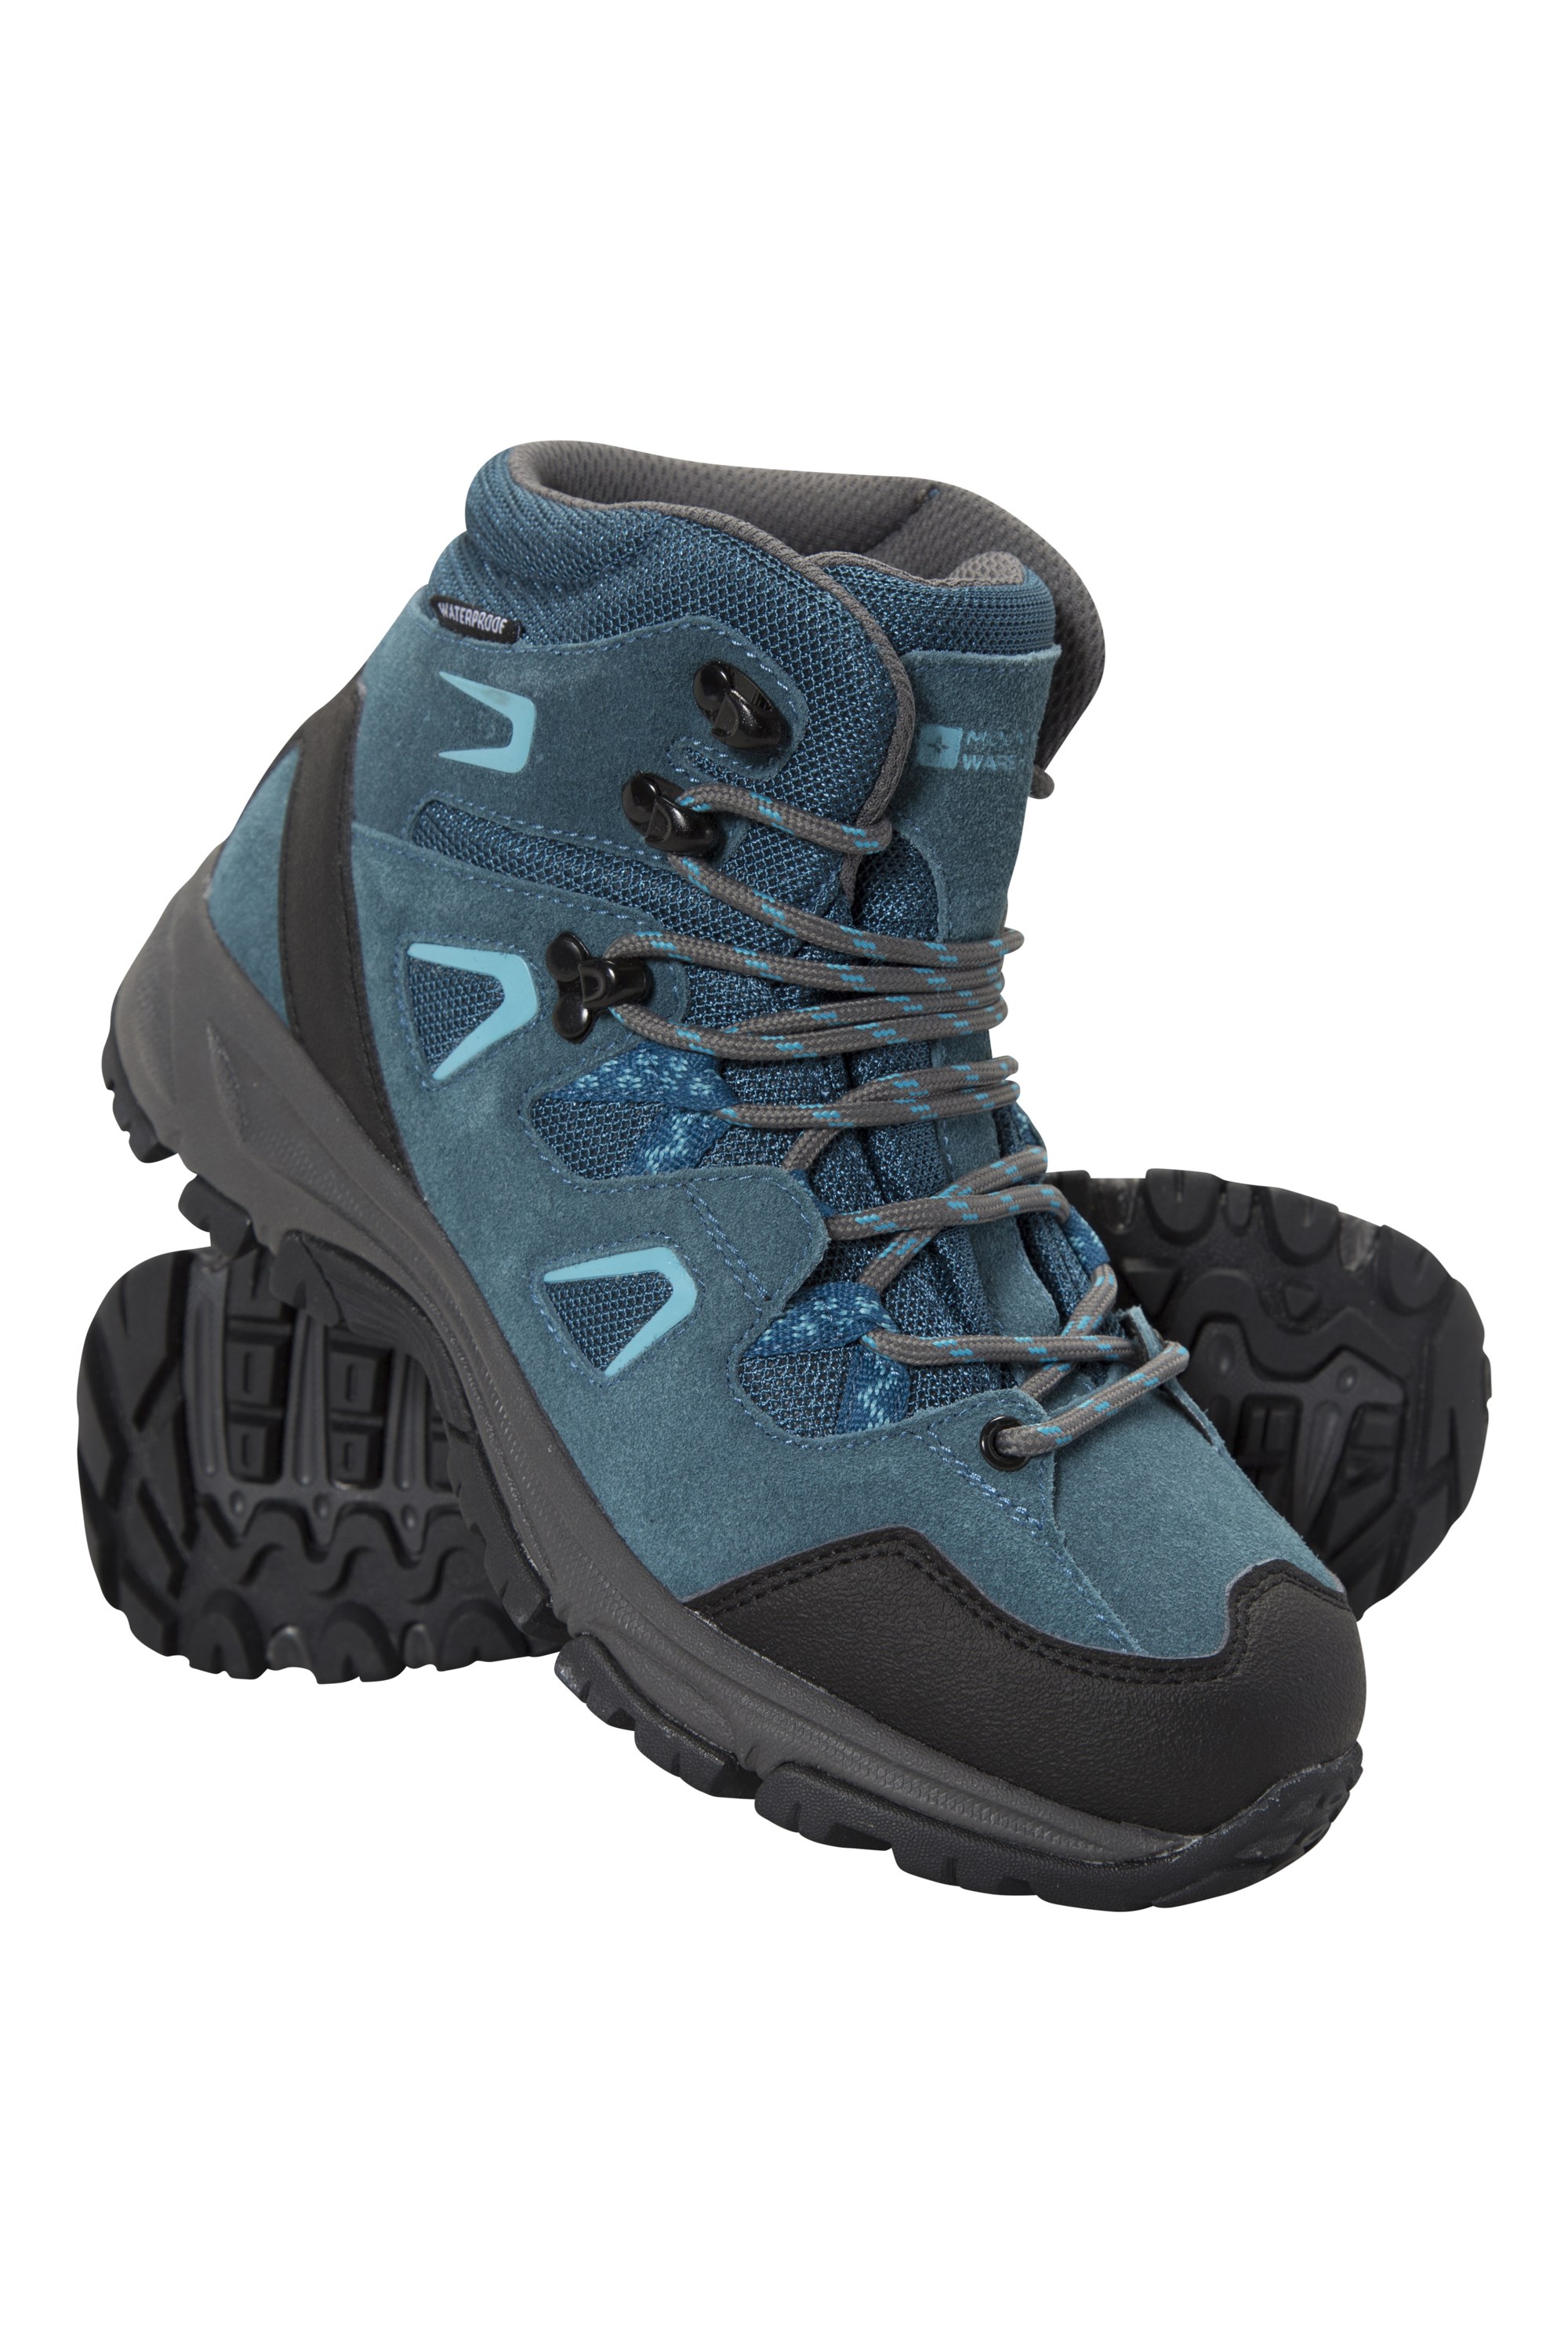 Mountain Warehouse Astronomy Womens Waterproof Mid Boots Blue